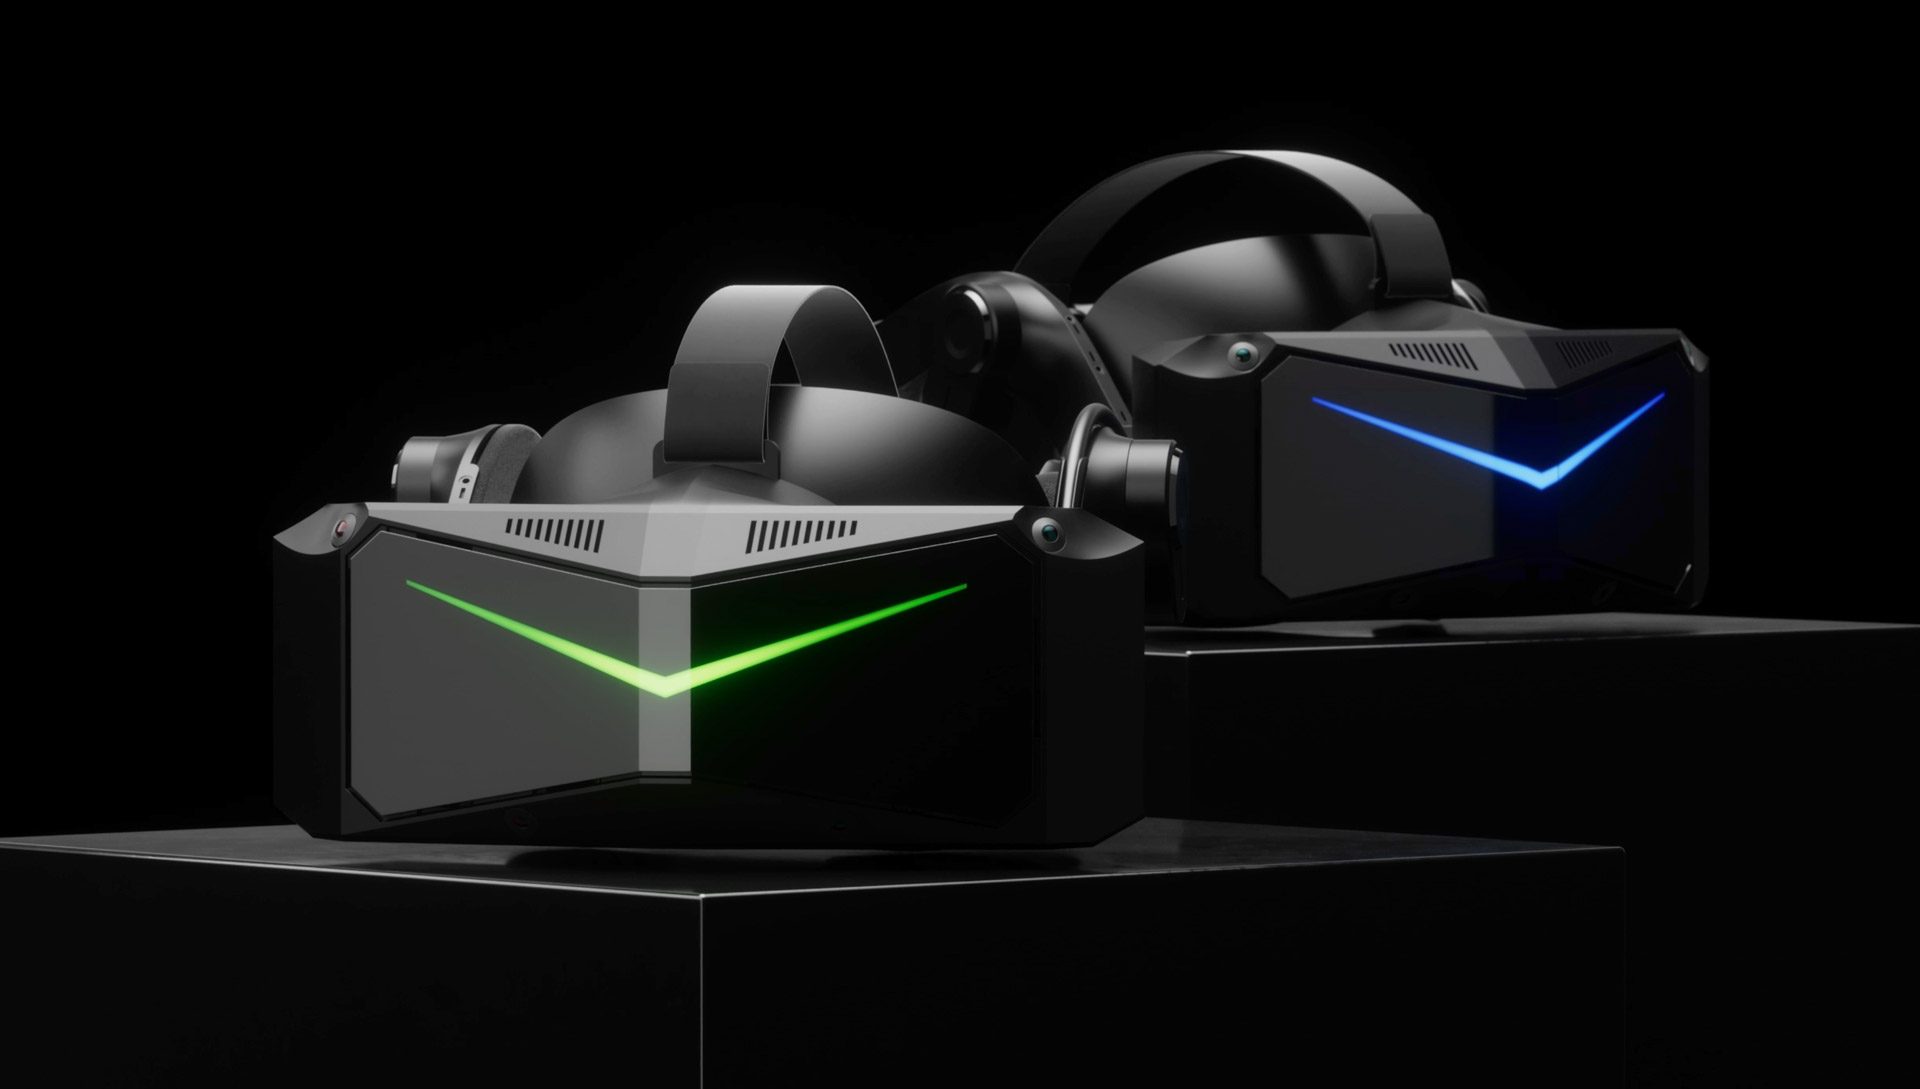 Pimax Introduces Trial Payment Model to Let Customers Try New Headsets Before Paying Full Price